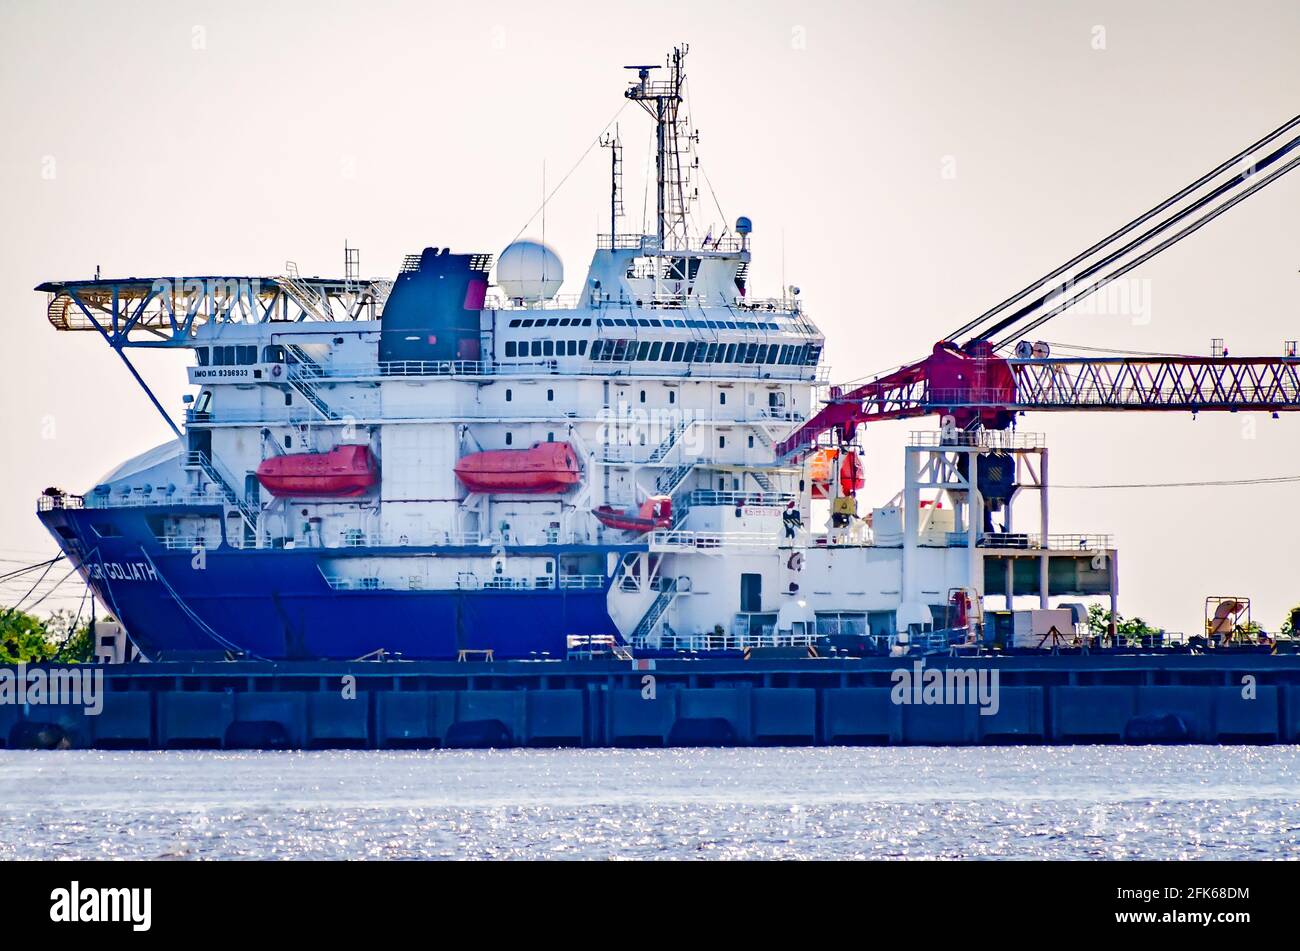 Nor Goliath, an offshore supply ship, is docked, April 22, 2021, in Pascagoula, Mississippi. The ship was built in 2009. Stock Photo